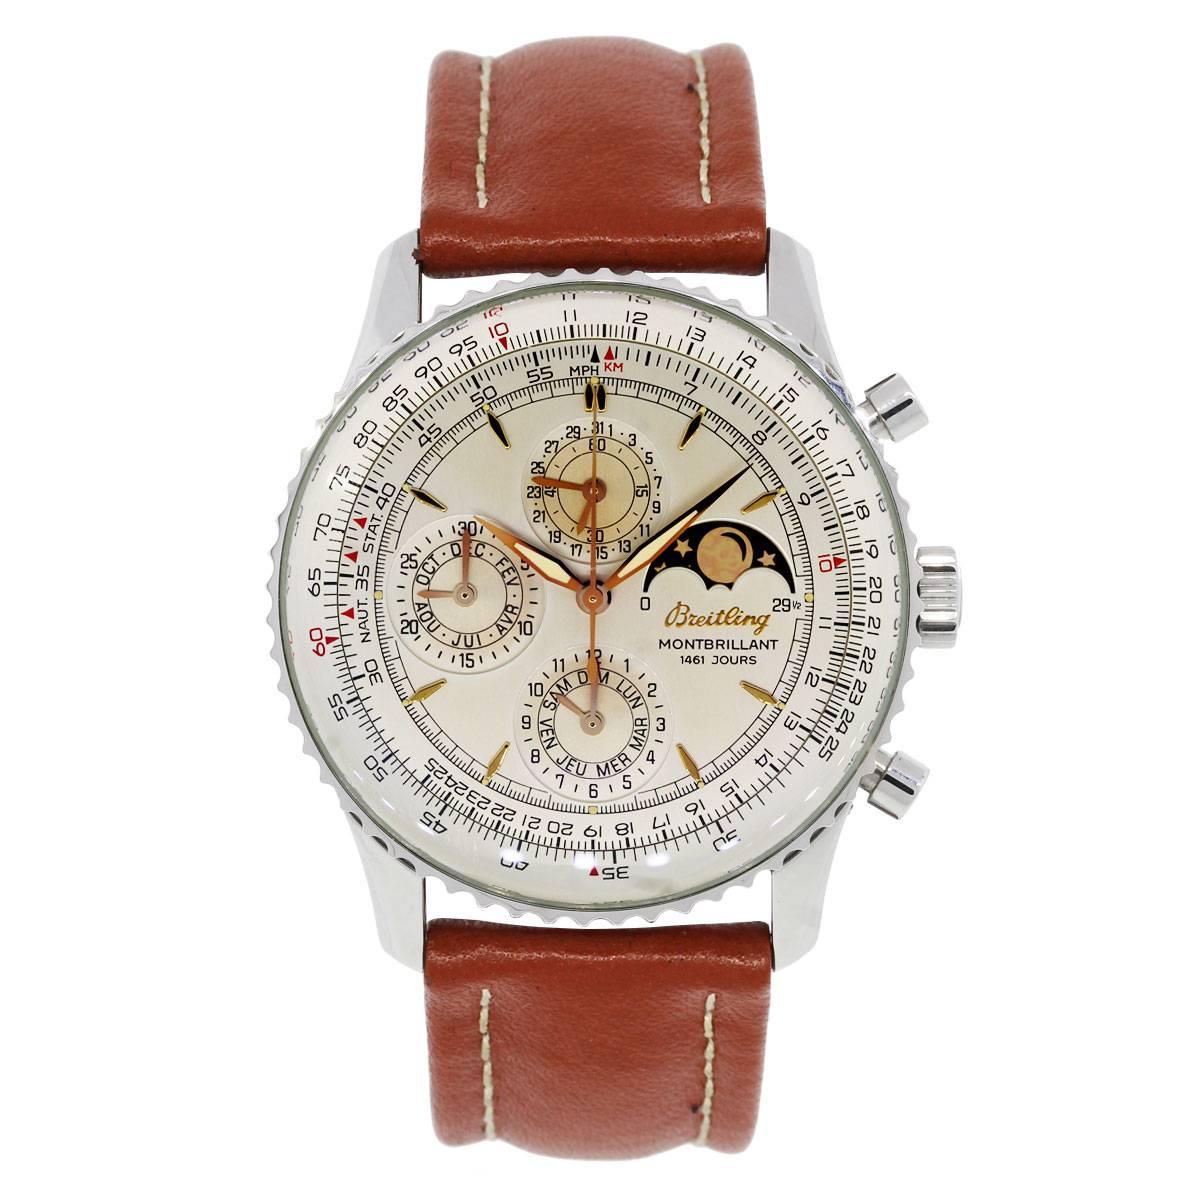 Brand: Breitling
MPN: A19030
Style	: Montbrilliant 1461 Jours Moonphase
Material: Stainless steel
Dial: White chronograph moonphase dial. Black and gold diamond markers with rose gold luminescent hour and minute hands
Bezel: Stainless steel